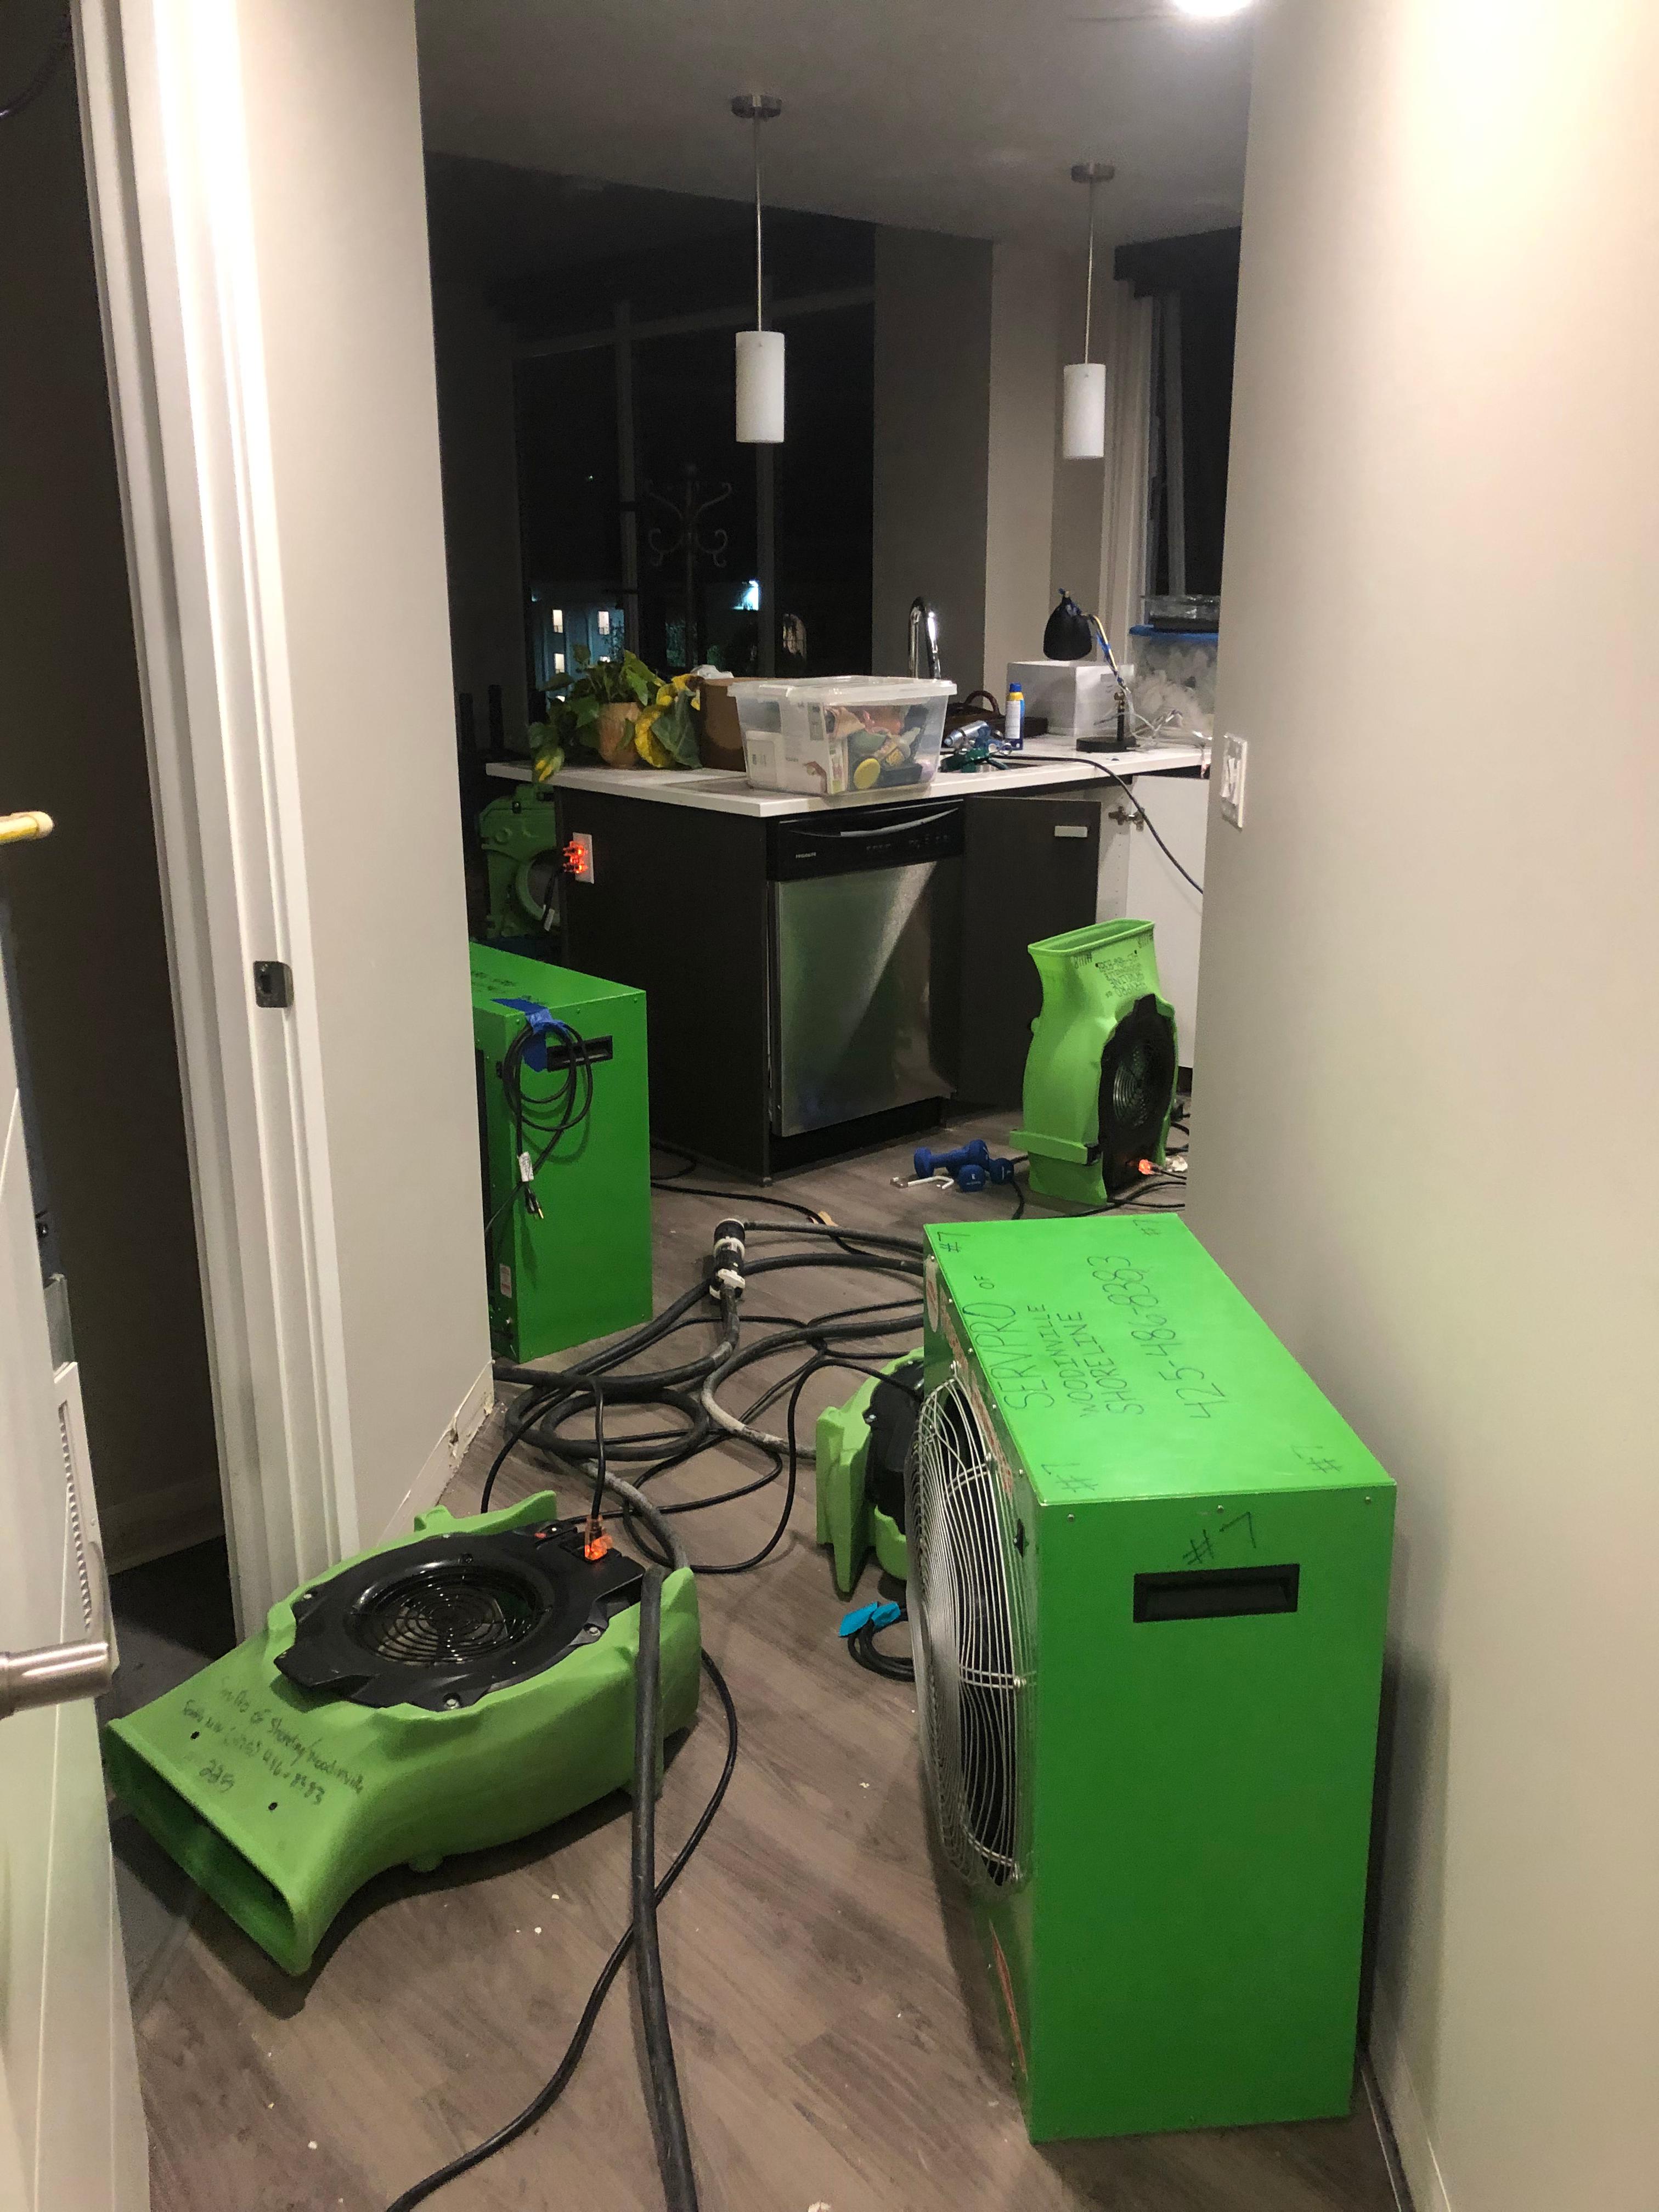 Have you suffered from a water leak in your kitchen? Give SERVPRO of Shoreline/Woodinville a call!